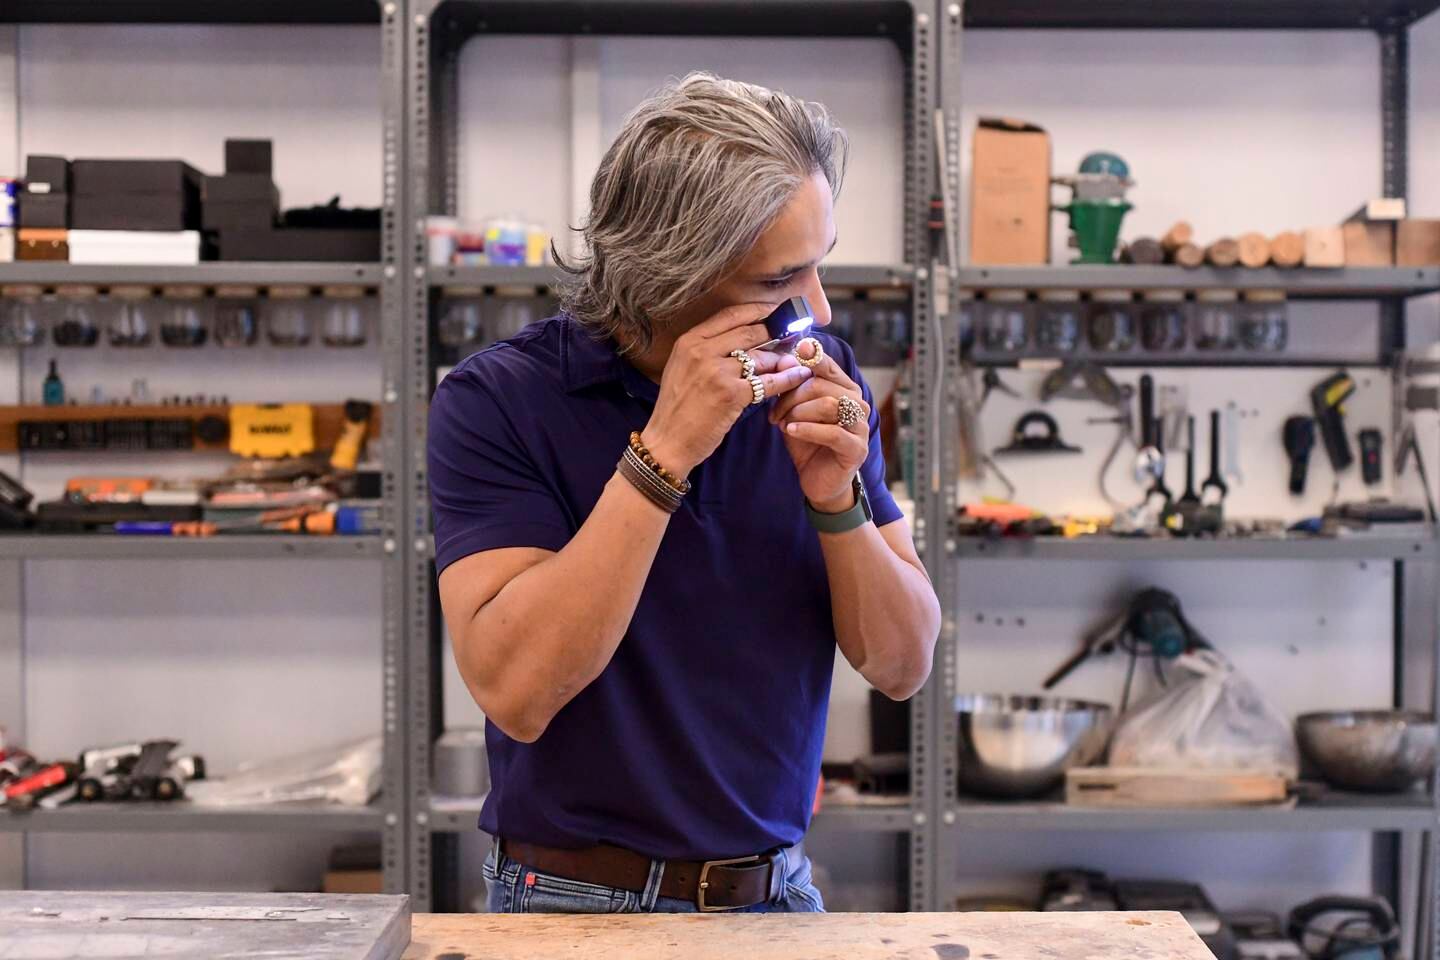 Riaz observes every detail through the jewellers loupe to check the quality of work produced at his studio space in Mussafah, Abu Dhabi. Khushnum Bhandari / The National
